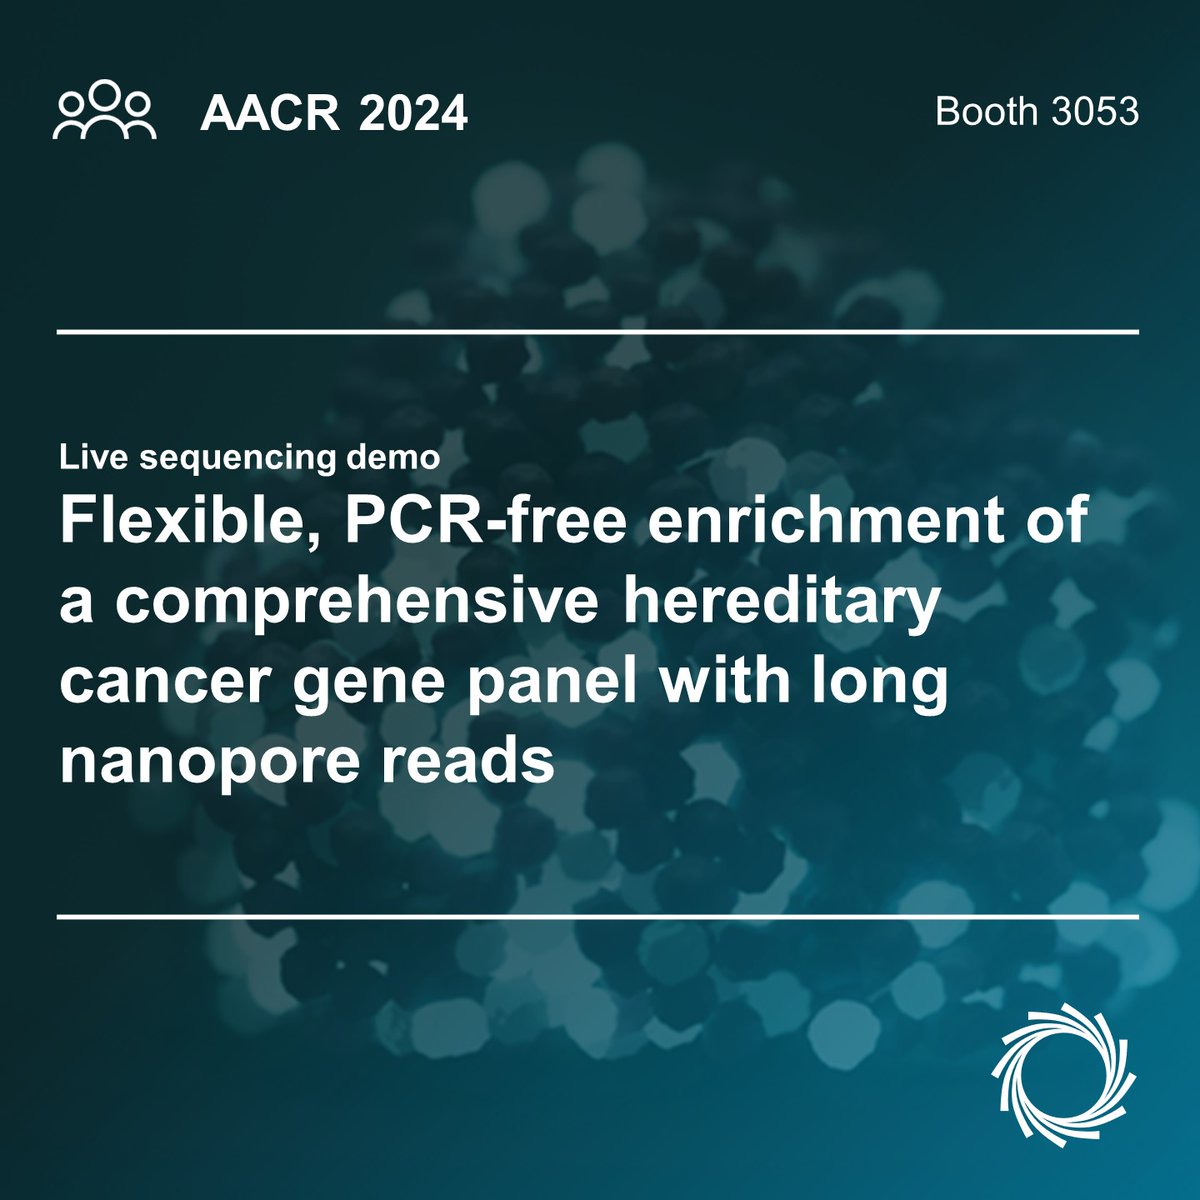 The first of today's two live demos kicks off in an hour. Discover how to use adaptive sampling to enrich any cancer gene panel of interest. This on-device targeted sequencing method enables variant detection without need for PCR Learn more: bit.ly/3J89Mfz #AACR24